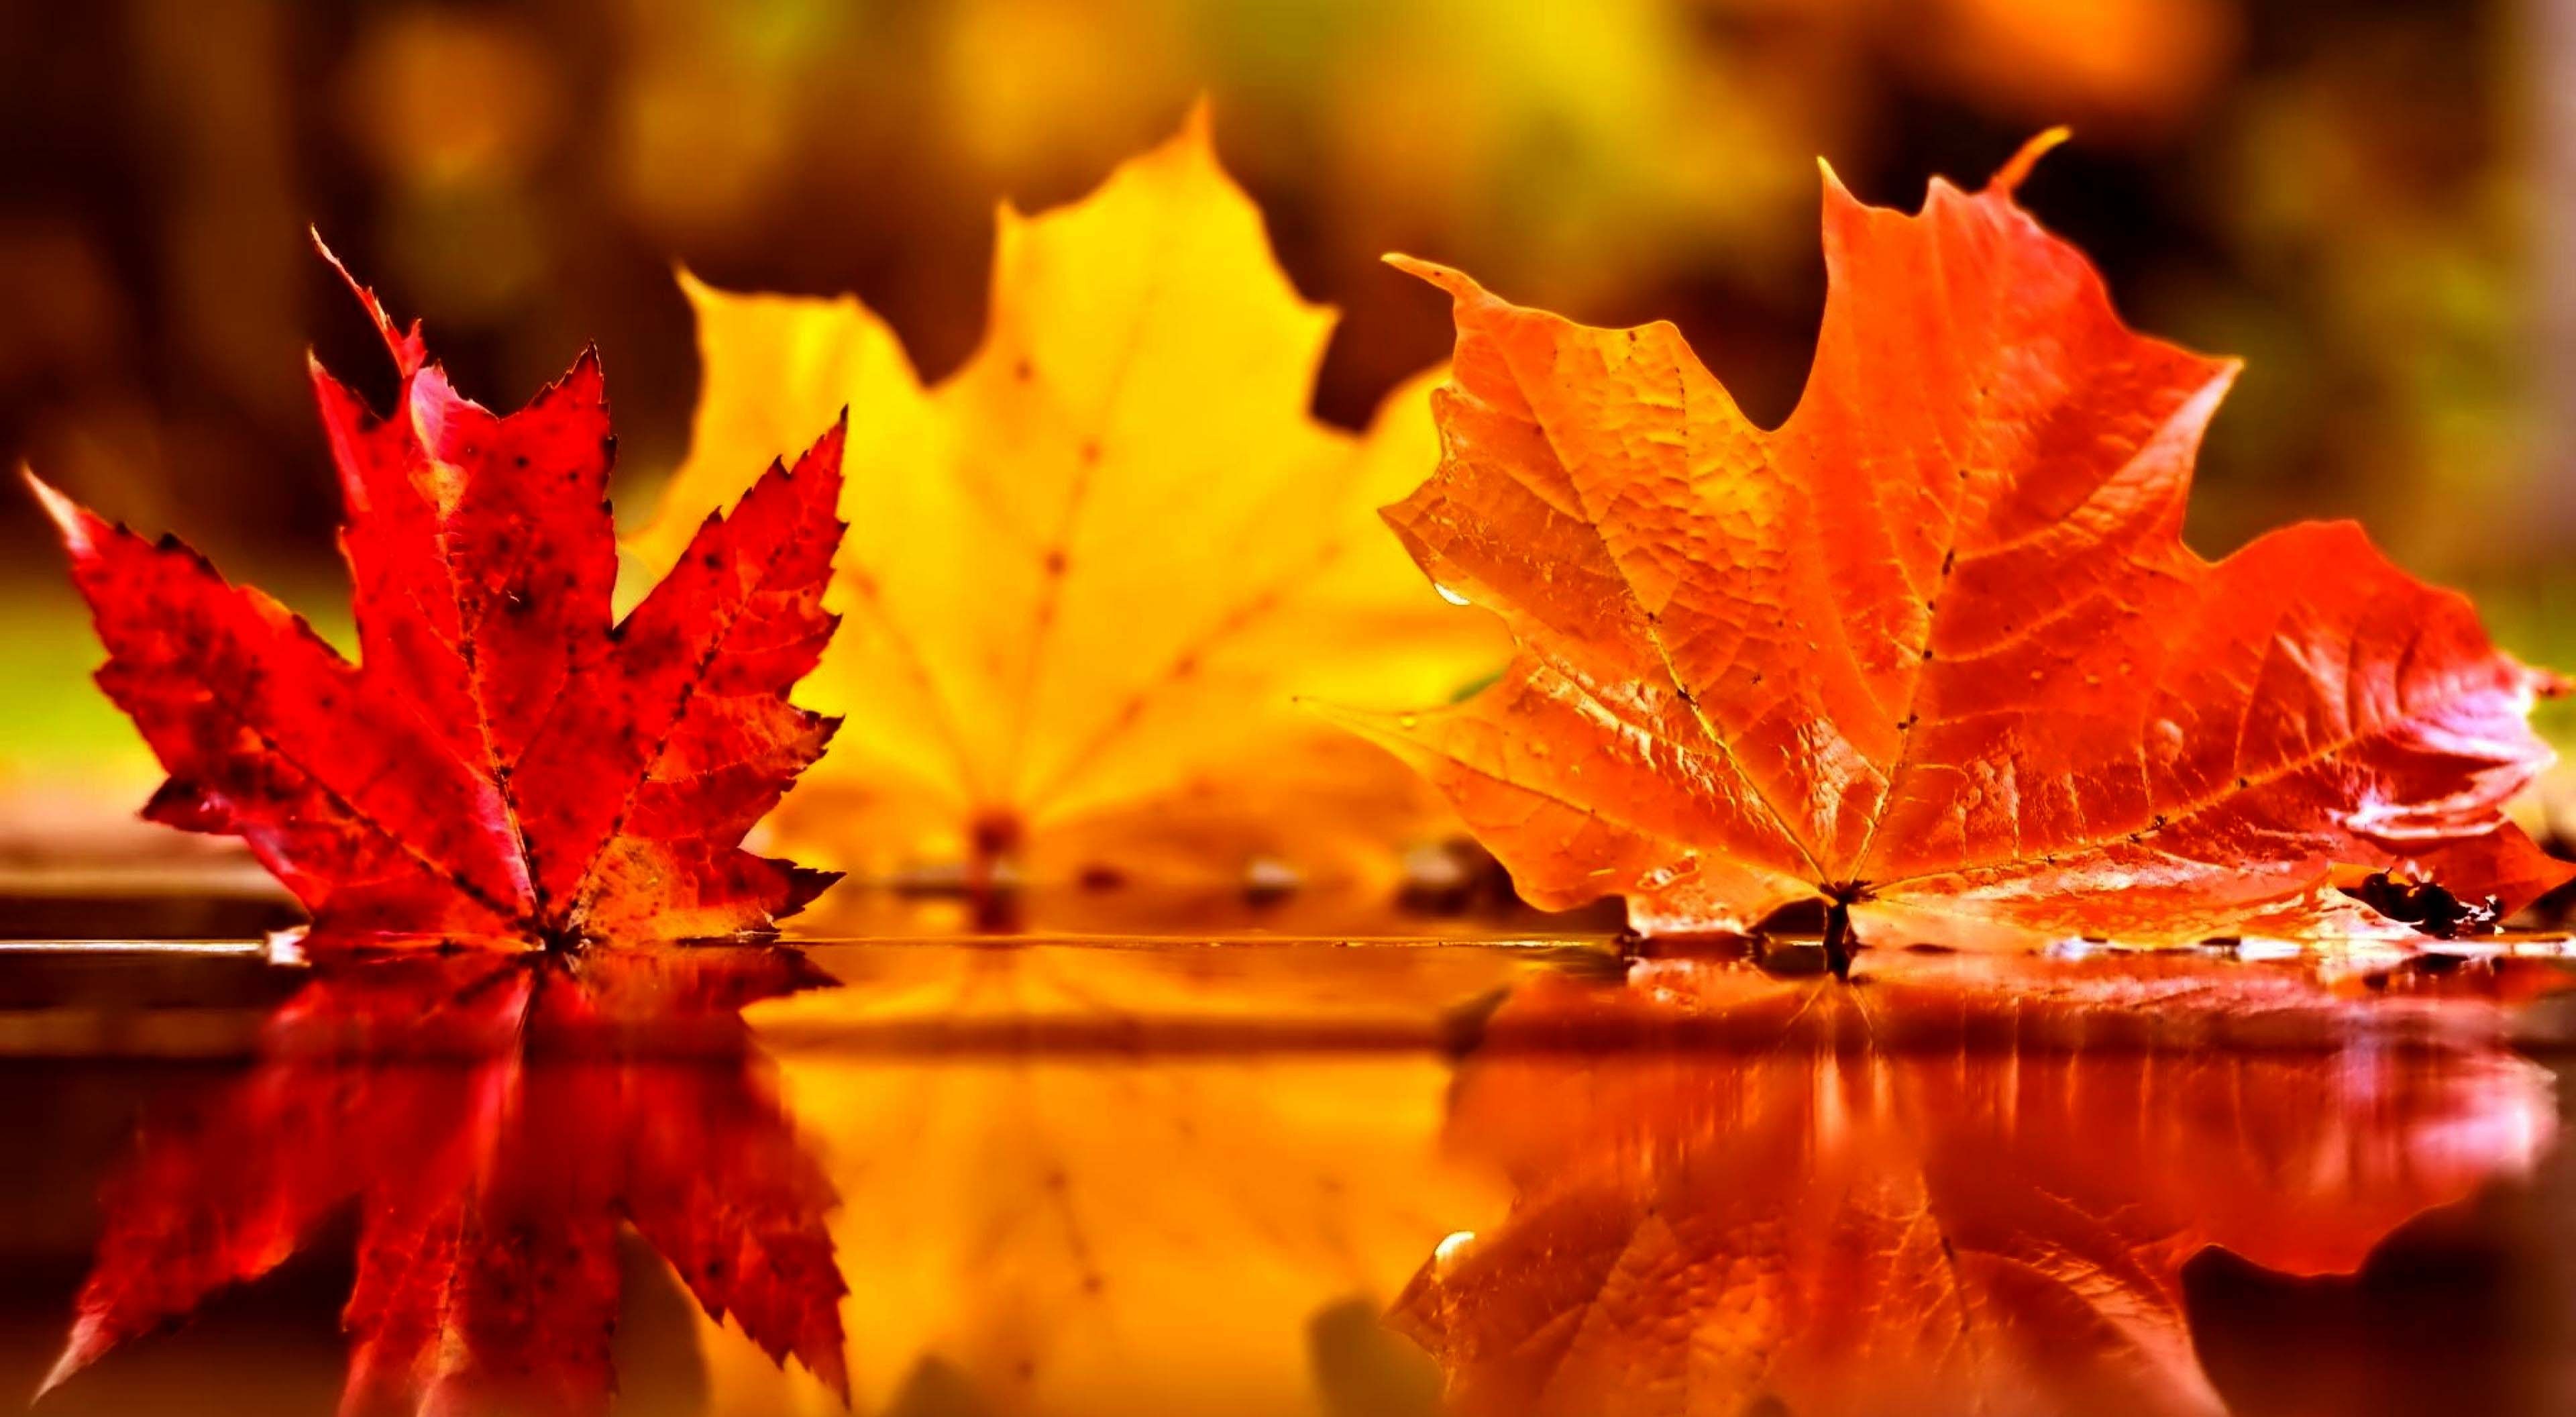 3840x2112 MkEcB7 On Fall Leaves Wallpaper